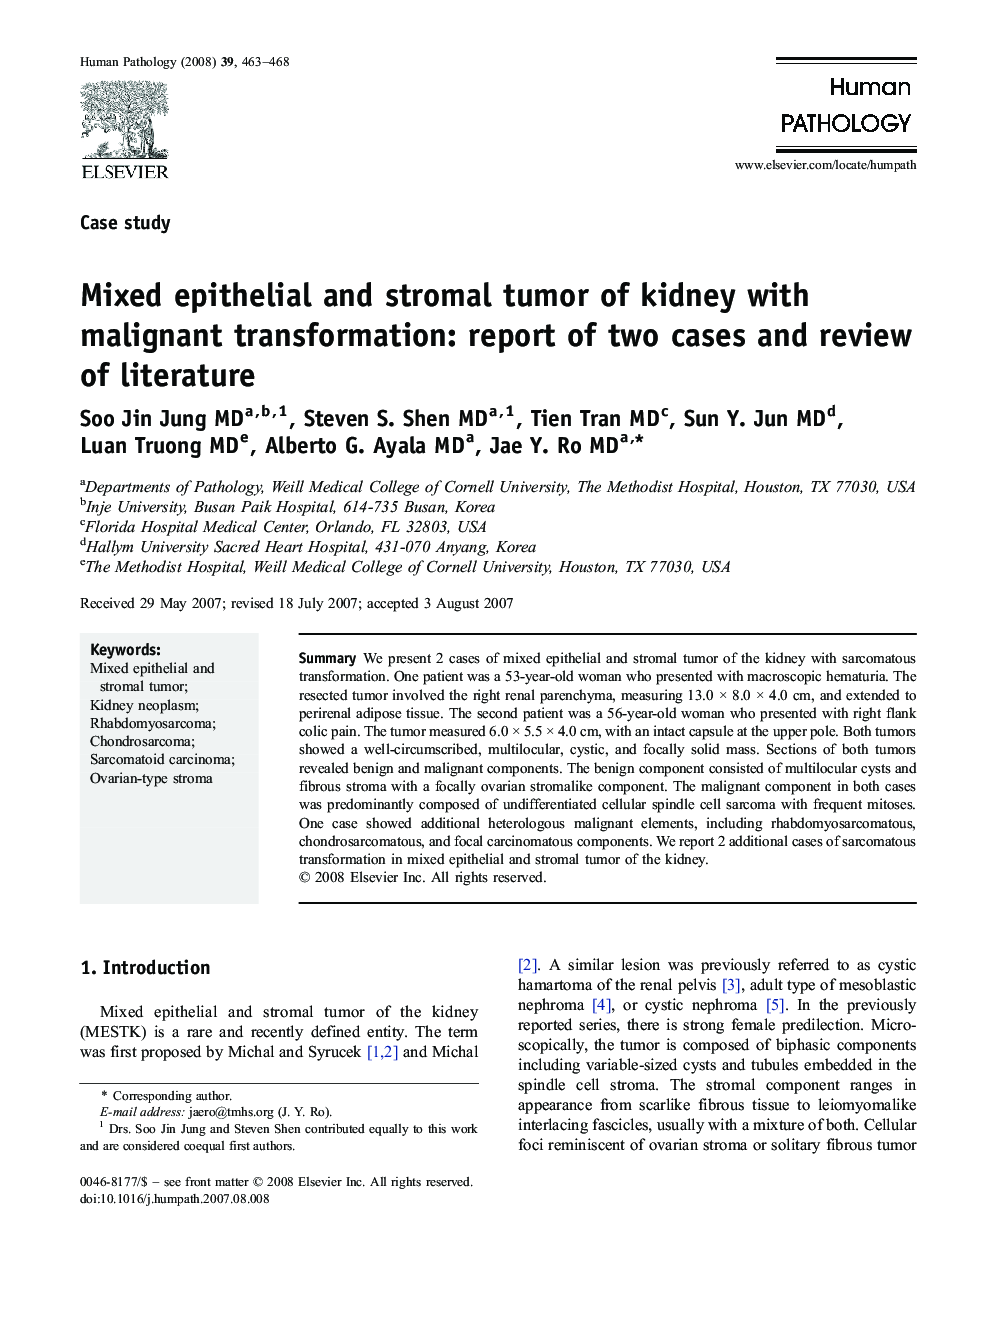 Mixed epithelial and stromal tumor of kidney with malignant transformation: report of two cases and review of literature